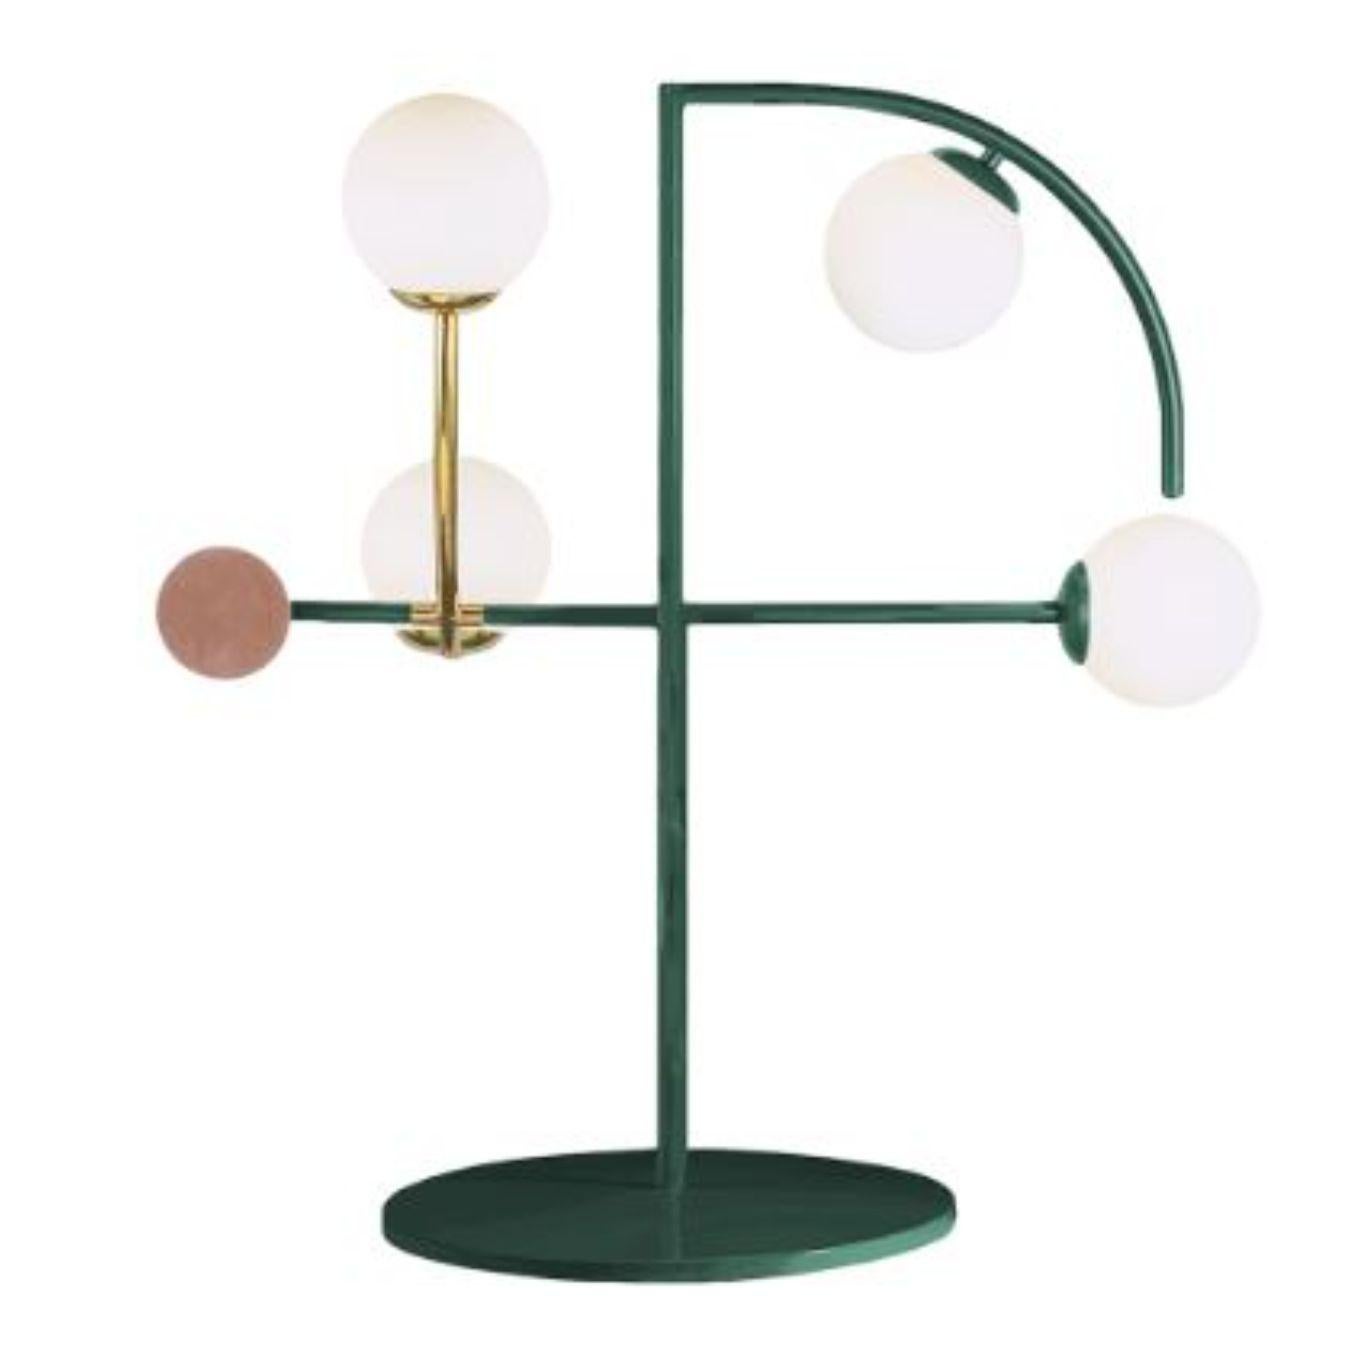 Moss Helio table lamp by Dooq.
Dimensions: W 50 x D 25 x H 67 cm.
Materials: lacquered metal, brass/nickel.
Also available in different colours and materials. 
Information:
230V/50Hz
4 x max. G9
4W LED

120V/60Hz
4 x max. G9
4W LED

All